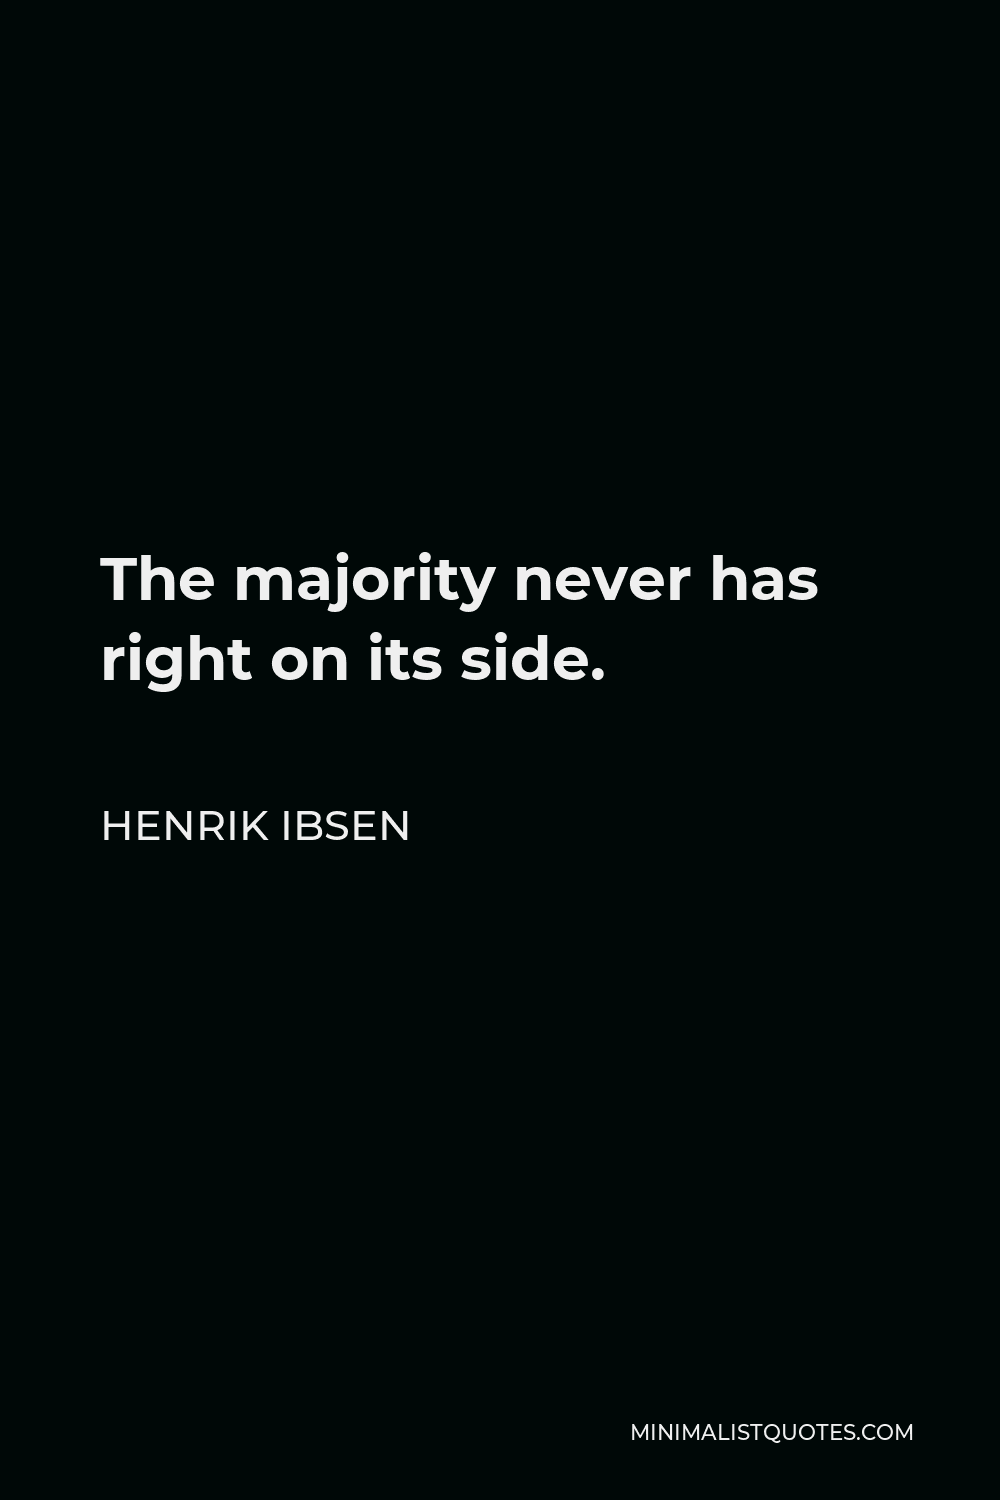 Henrik Ibsen Quote - The majority never has right on its side.